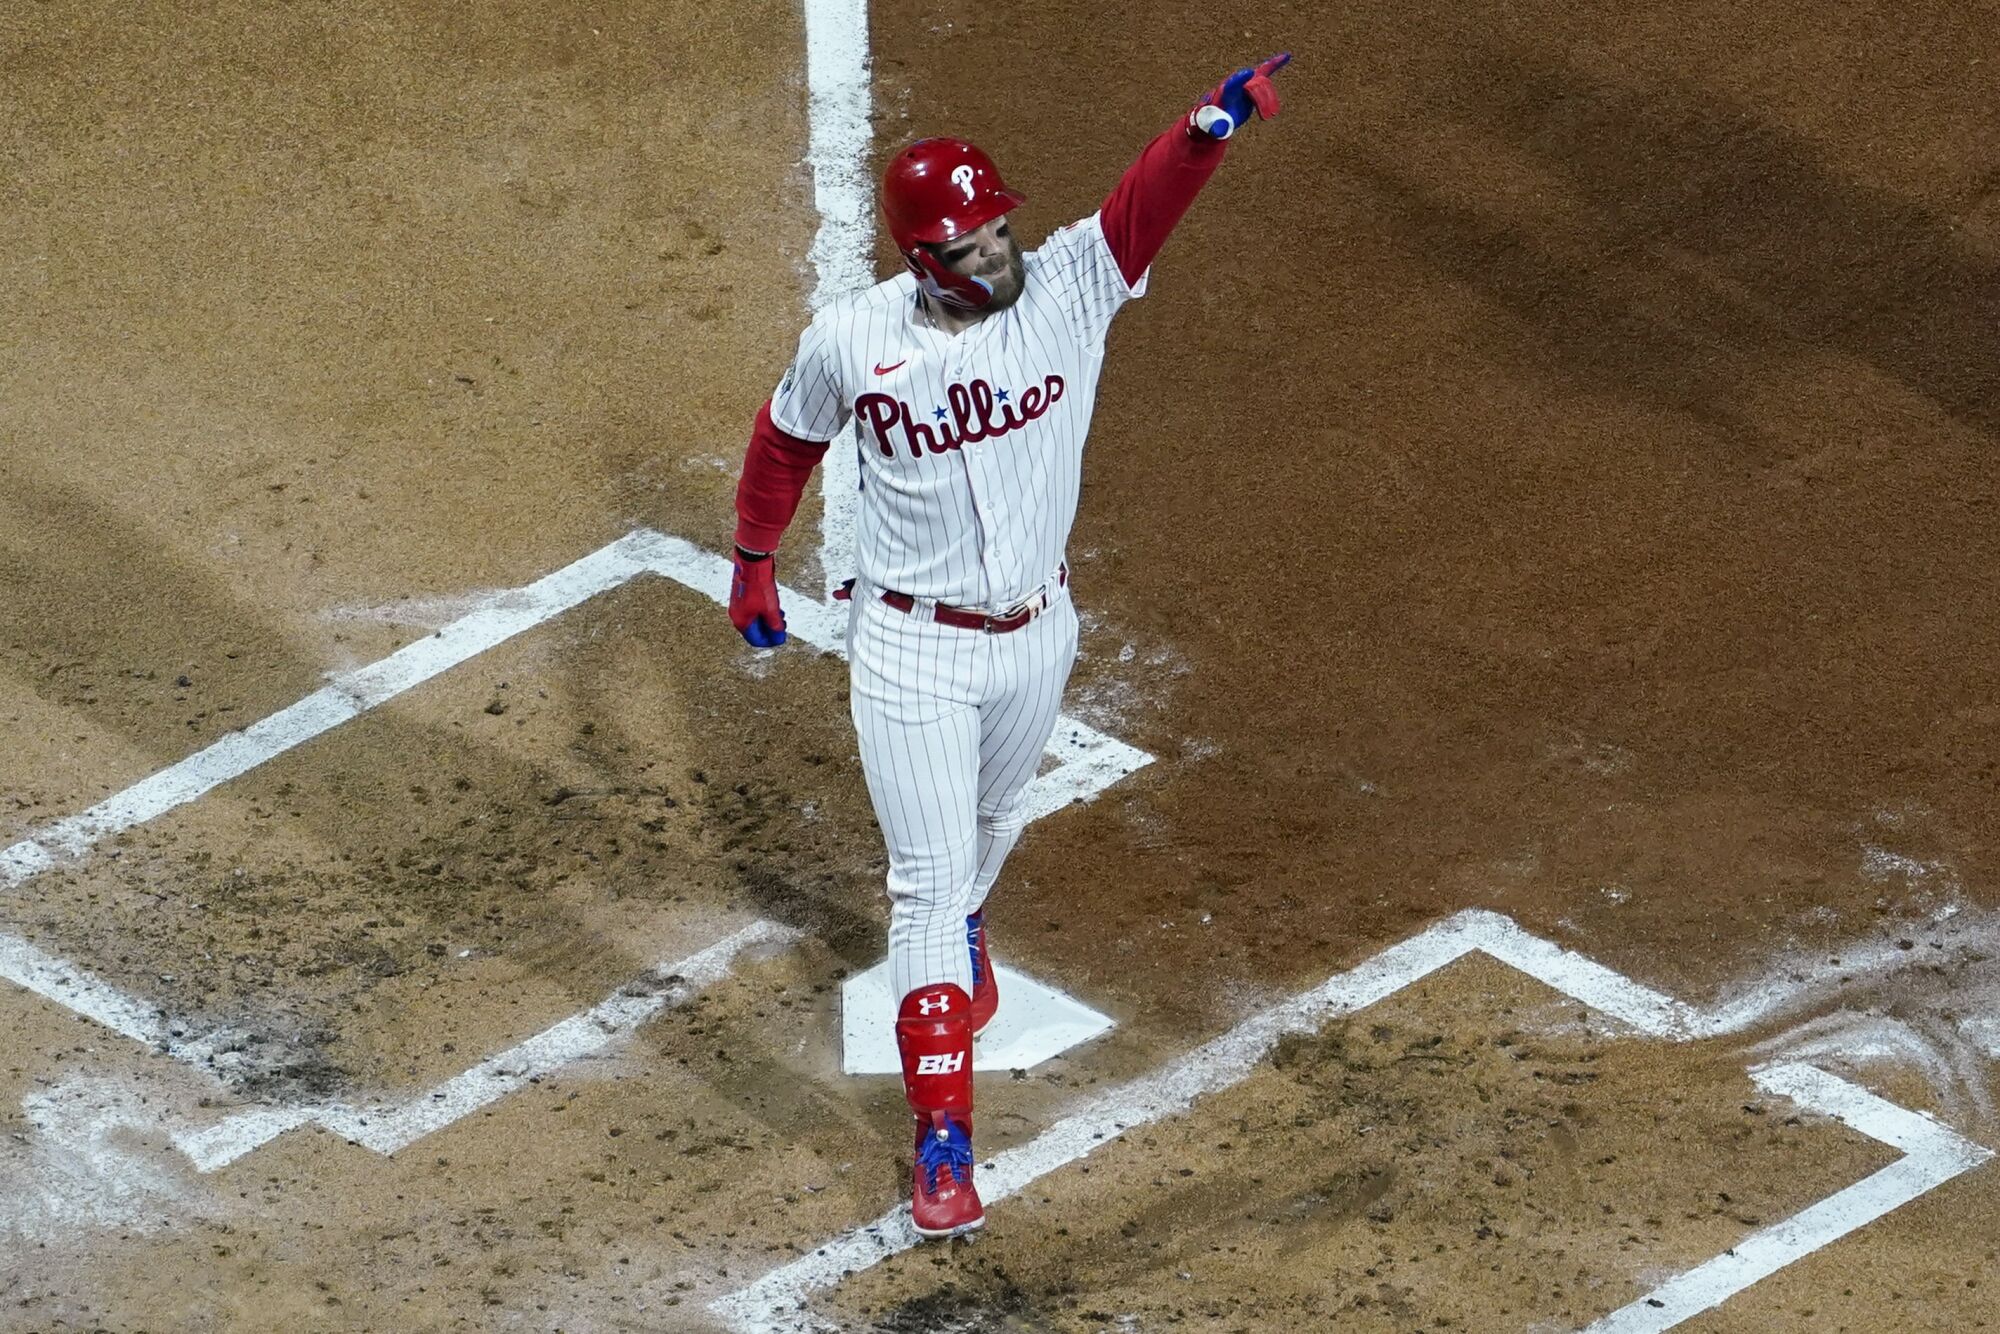 Philadelphia's Bryce Harper celebrates after hitting a two-run home run in Game 3 of the World Series on Tuesday.